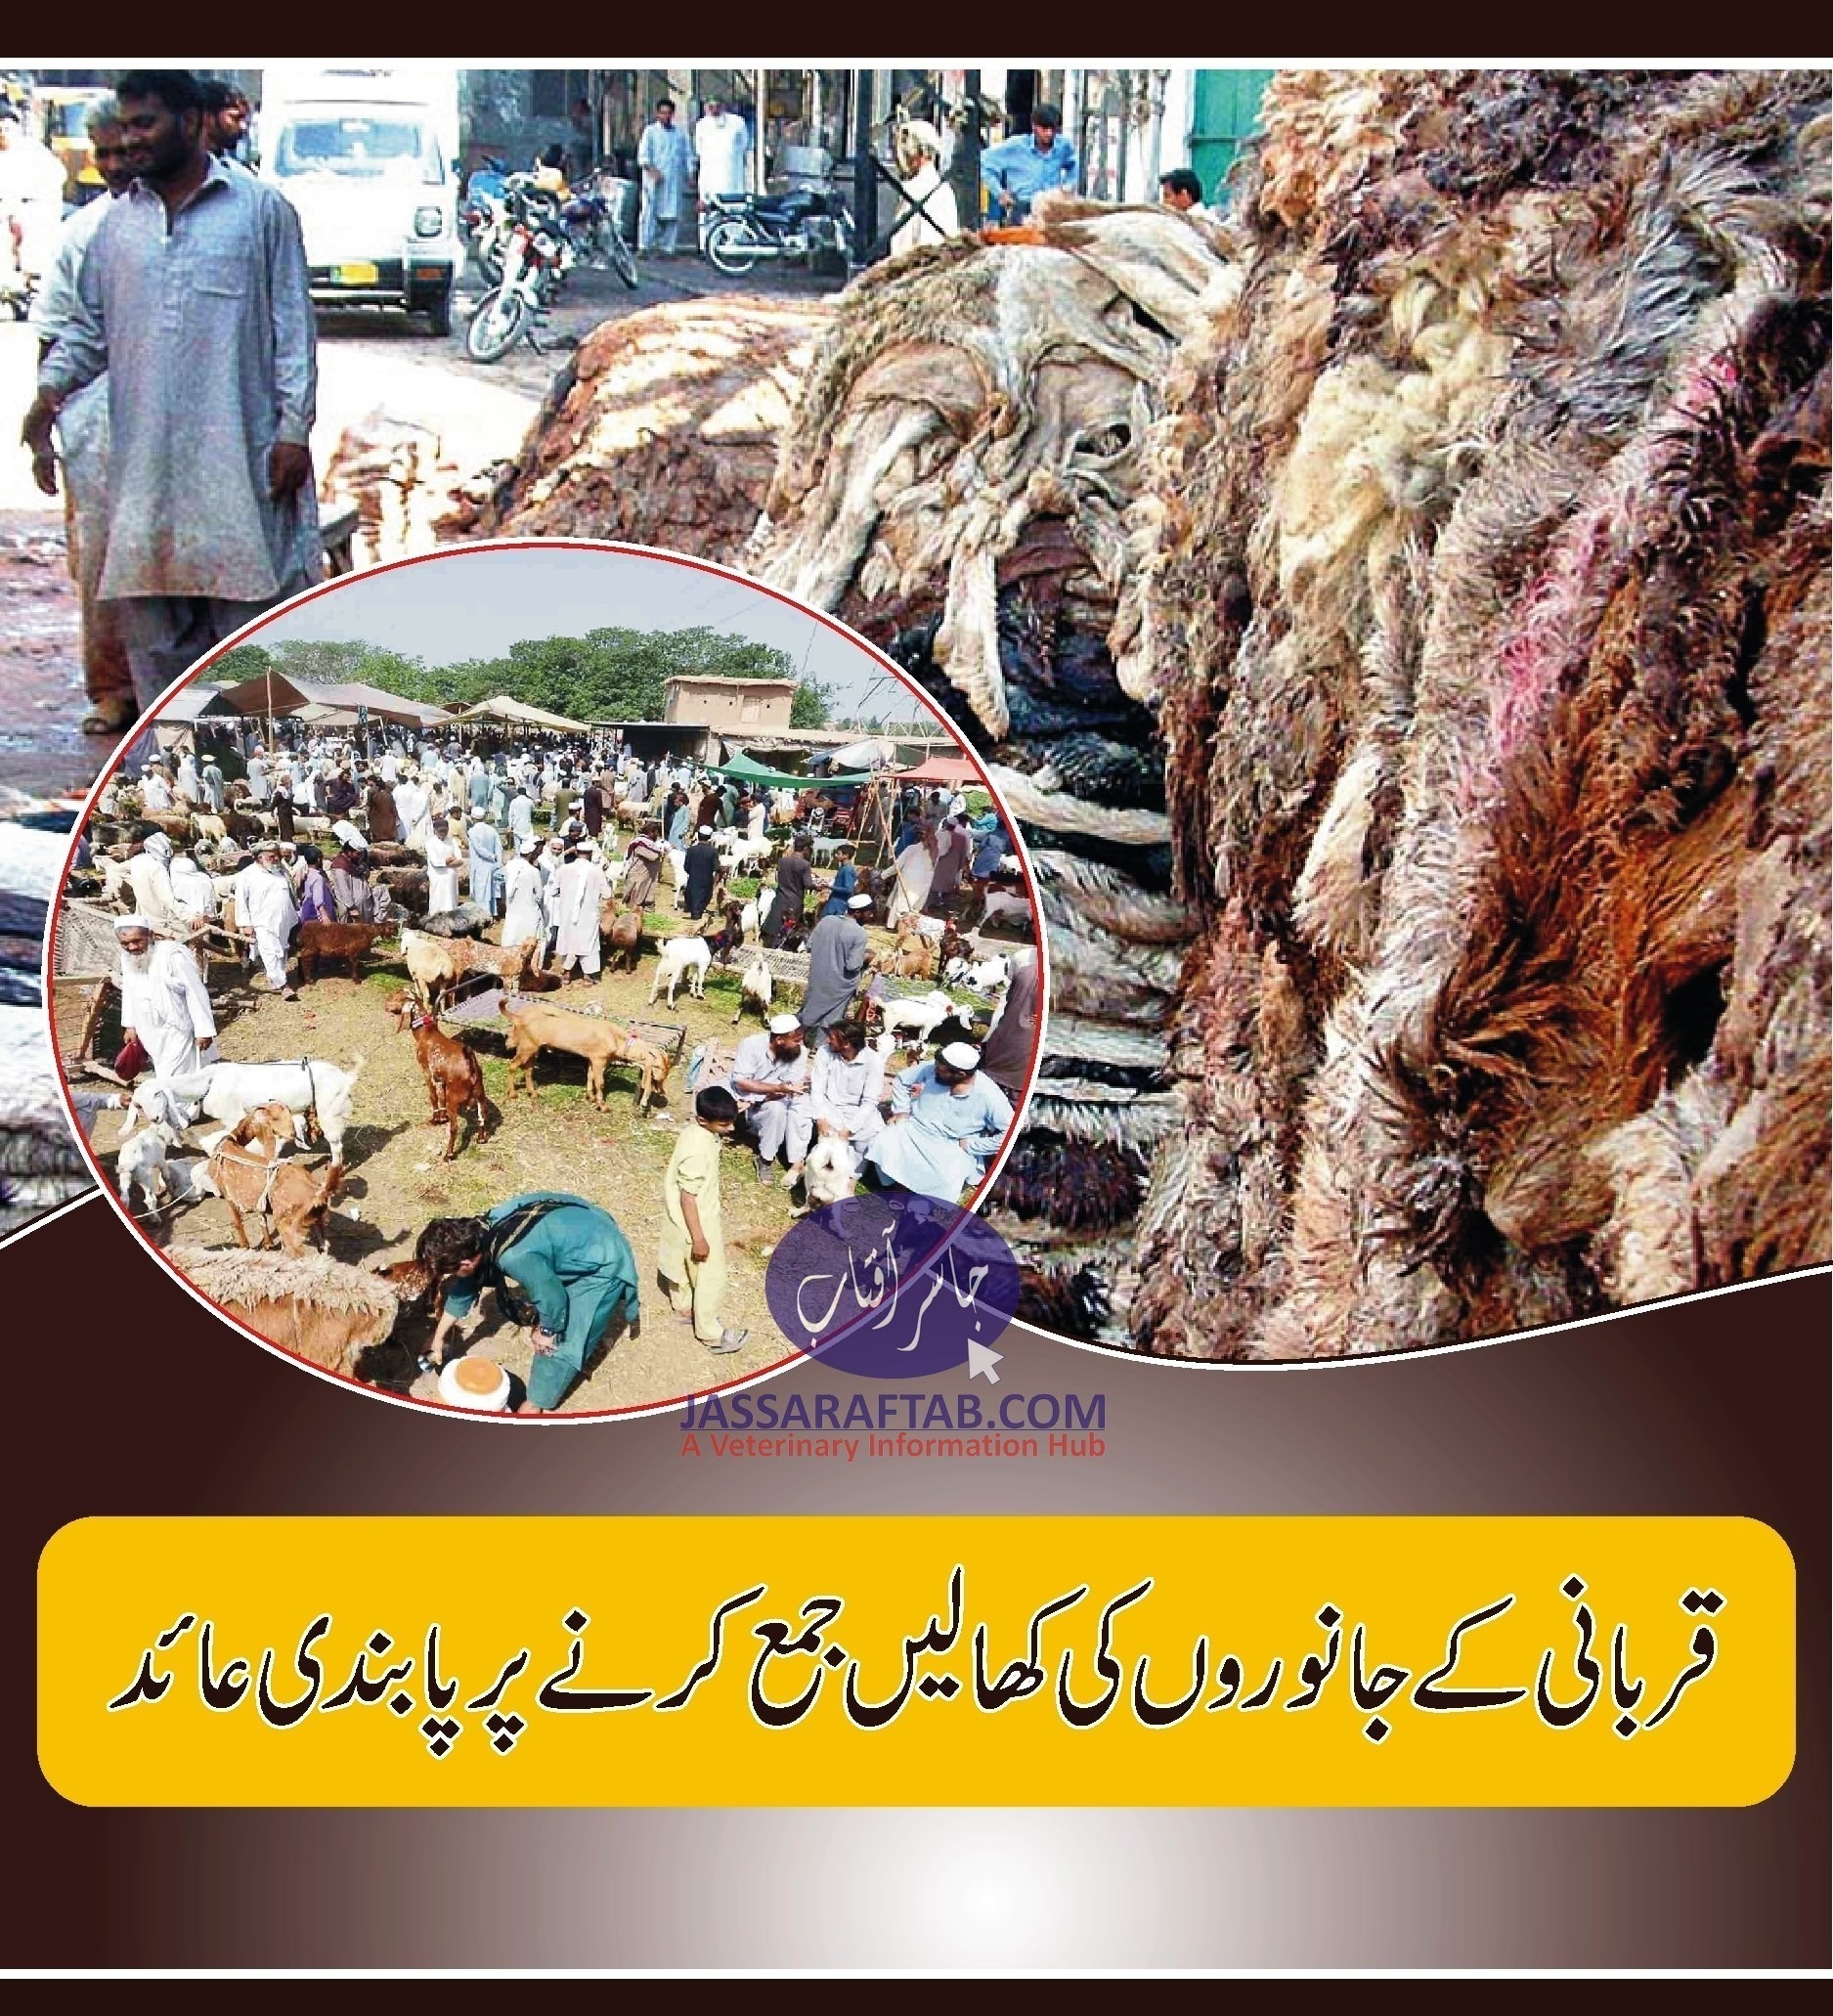 Ban on Hides collection